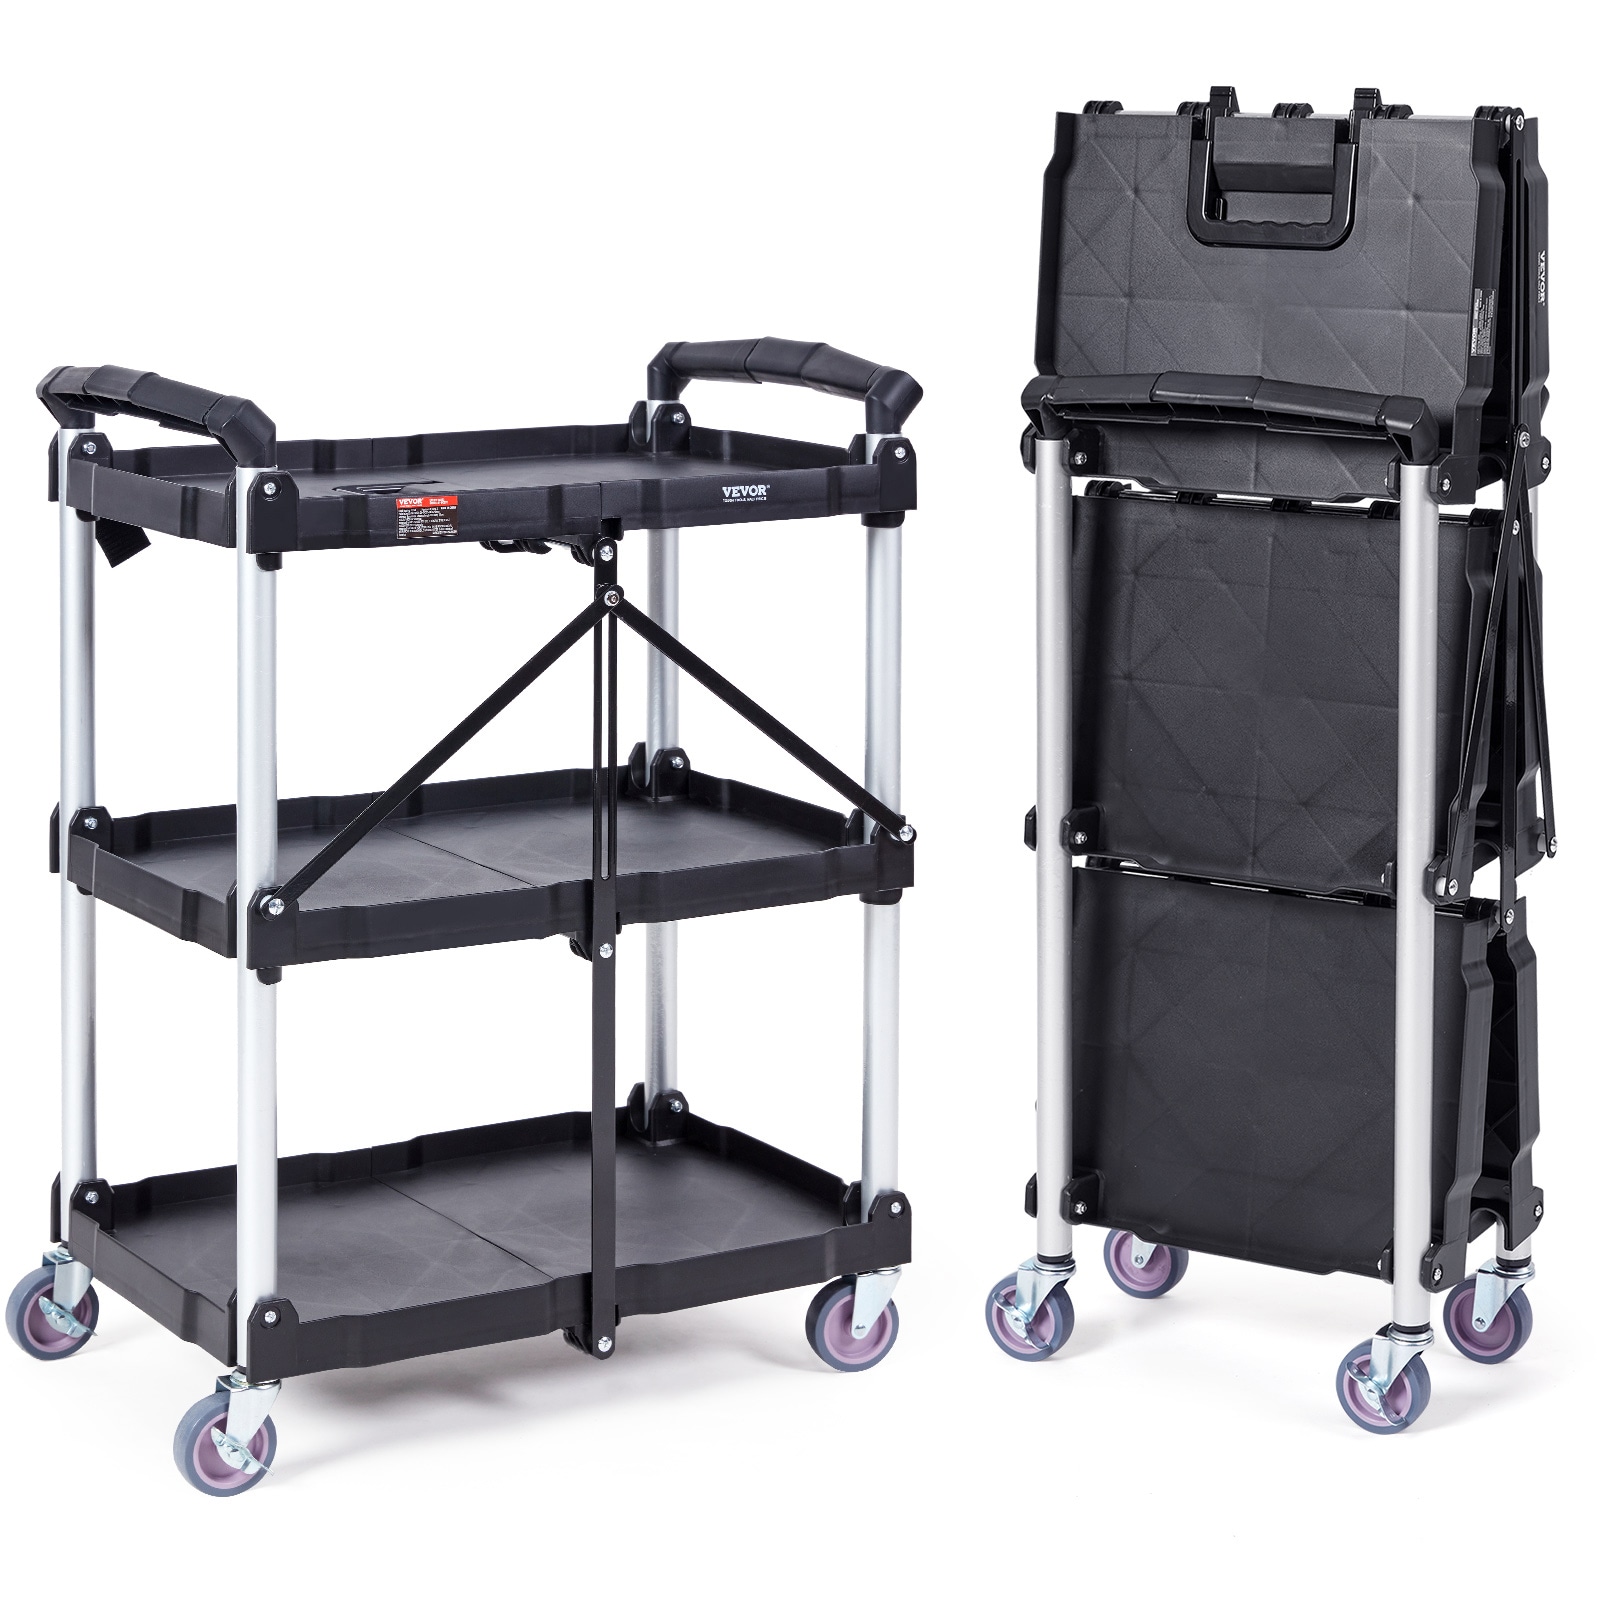 Rubbermaid Commercial Products, Collapsible X Cart - Transport Laundry,  Supplies and Groceries, Commercial Industrial Laundry Cart with Wheels,  Steel